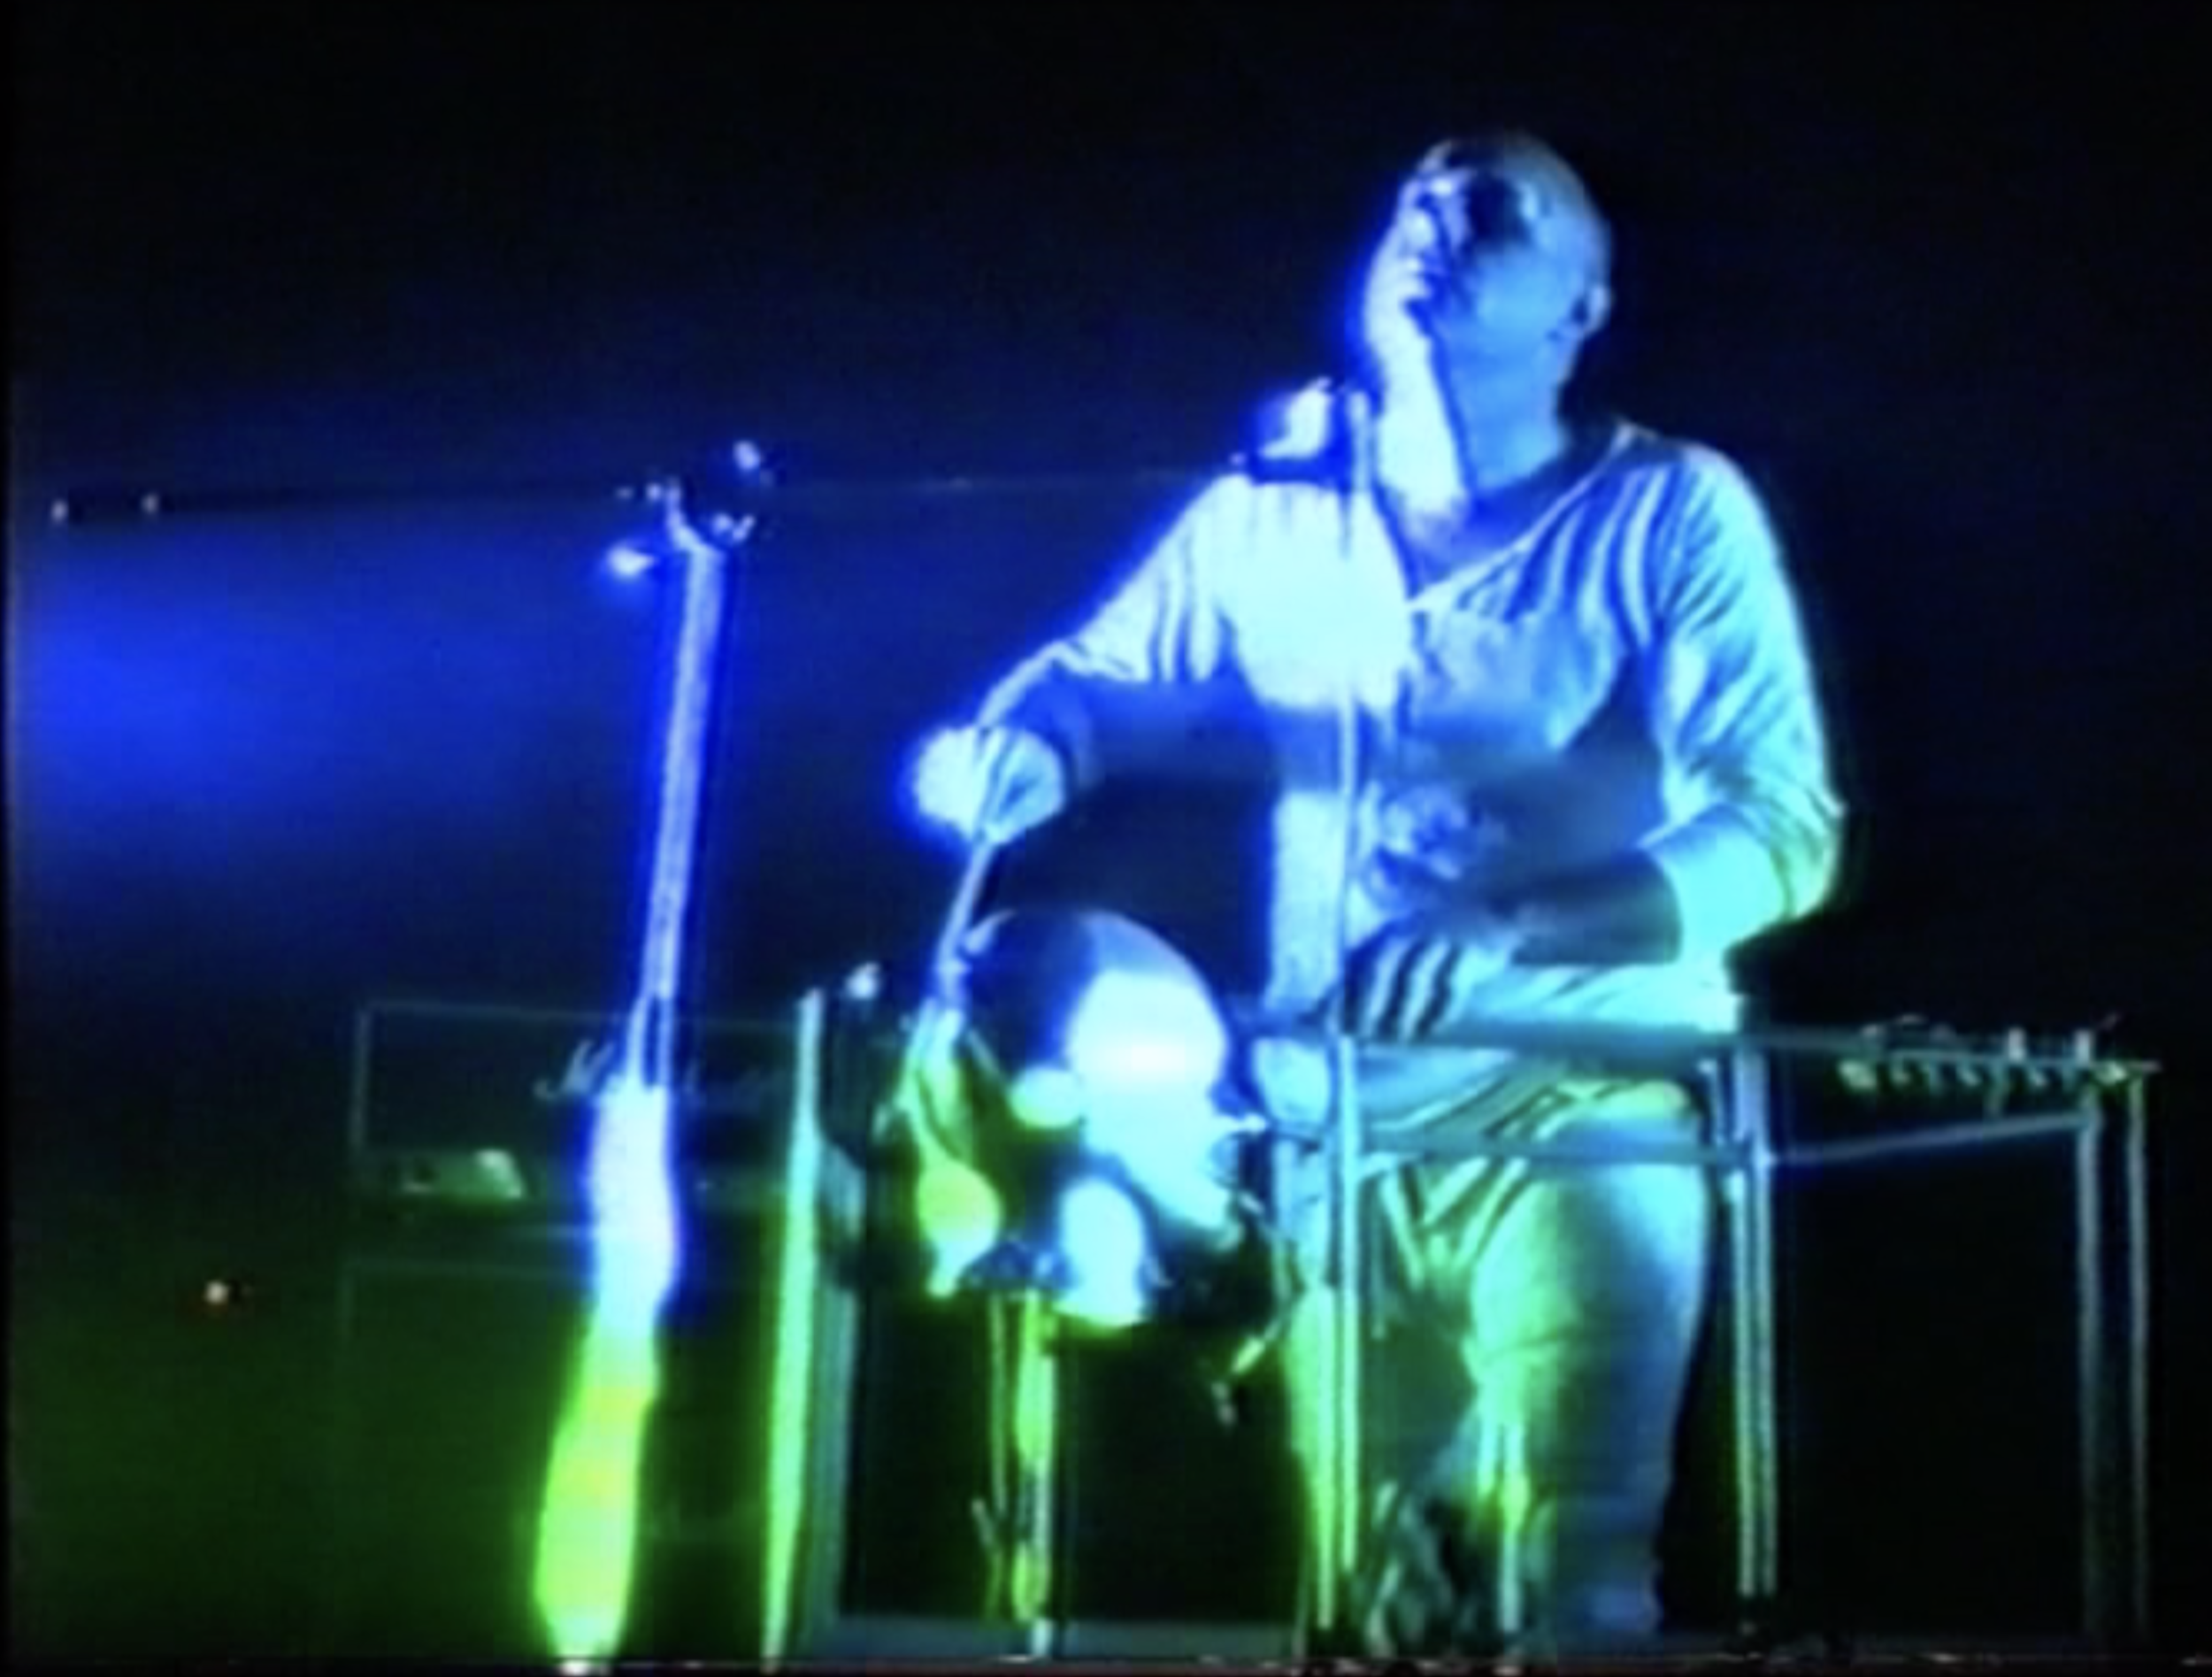 Image from  0.5 Media, Performance video, 1987